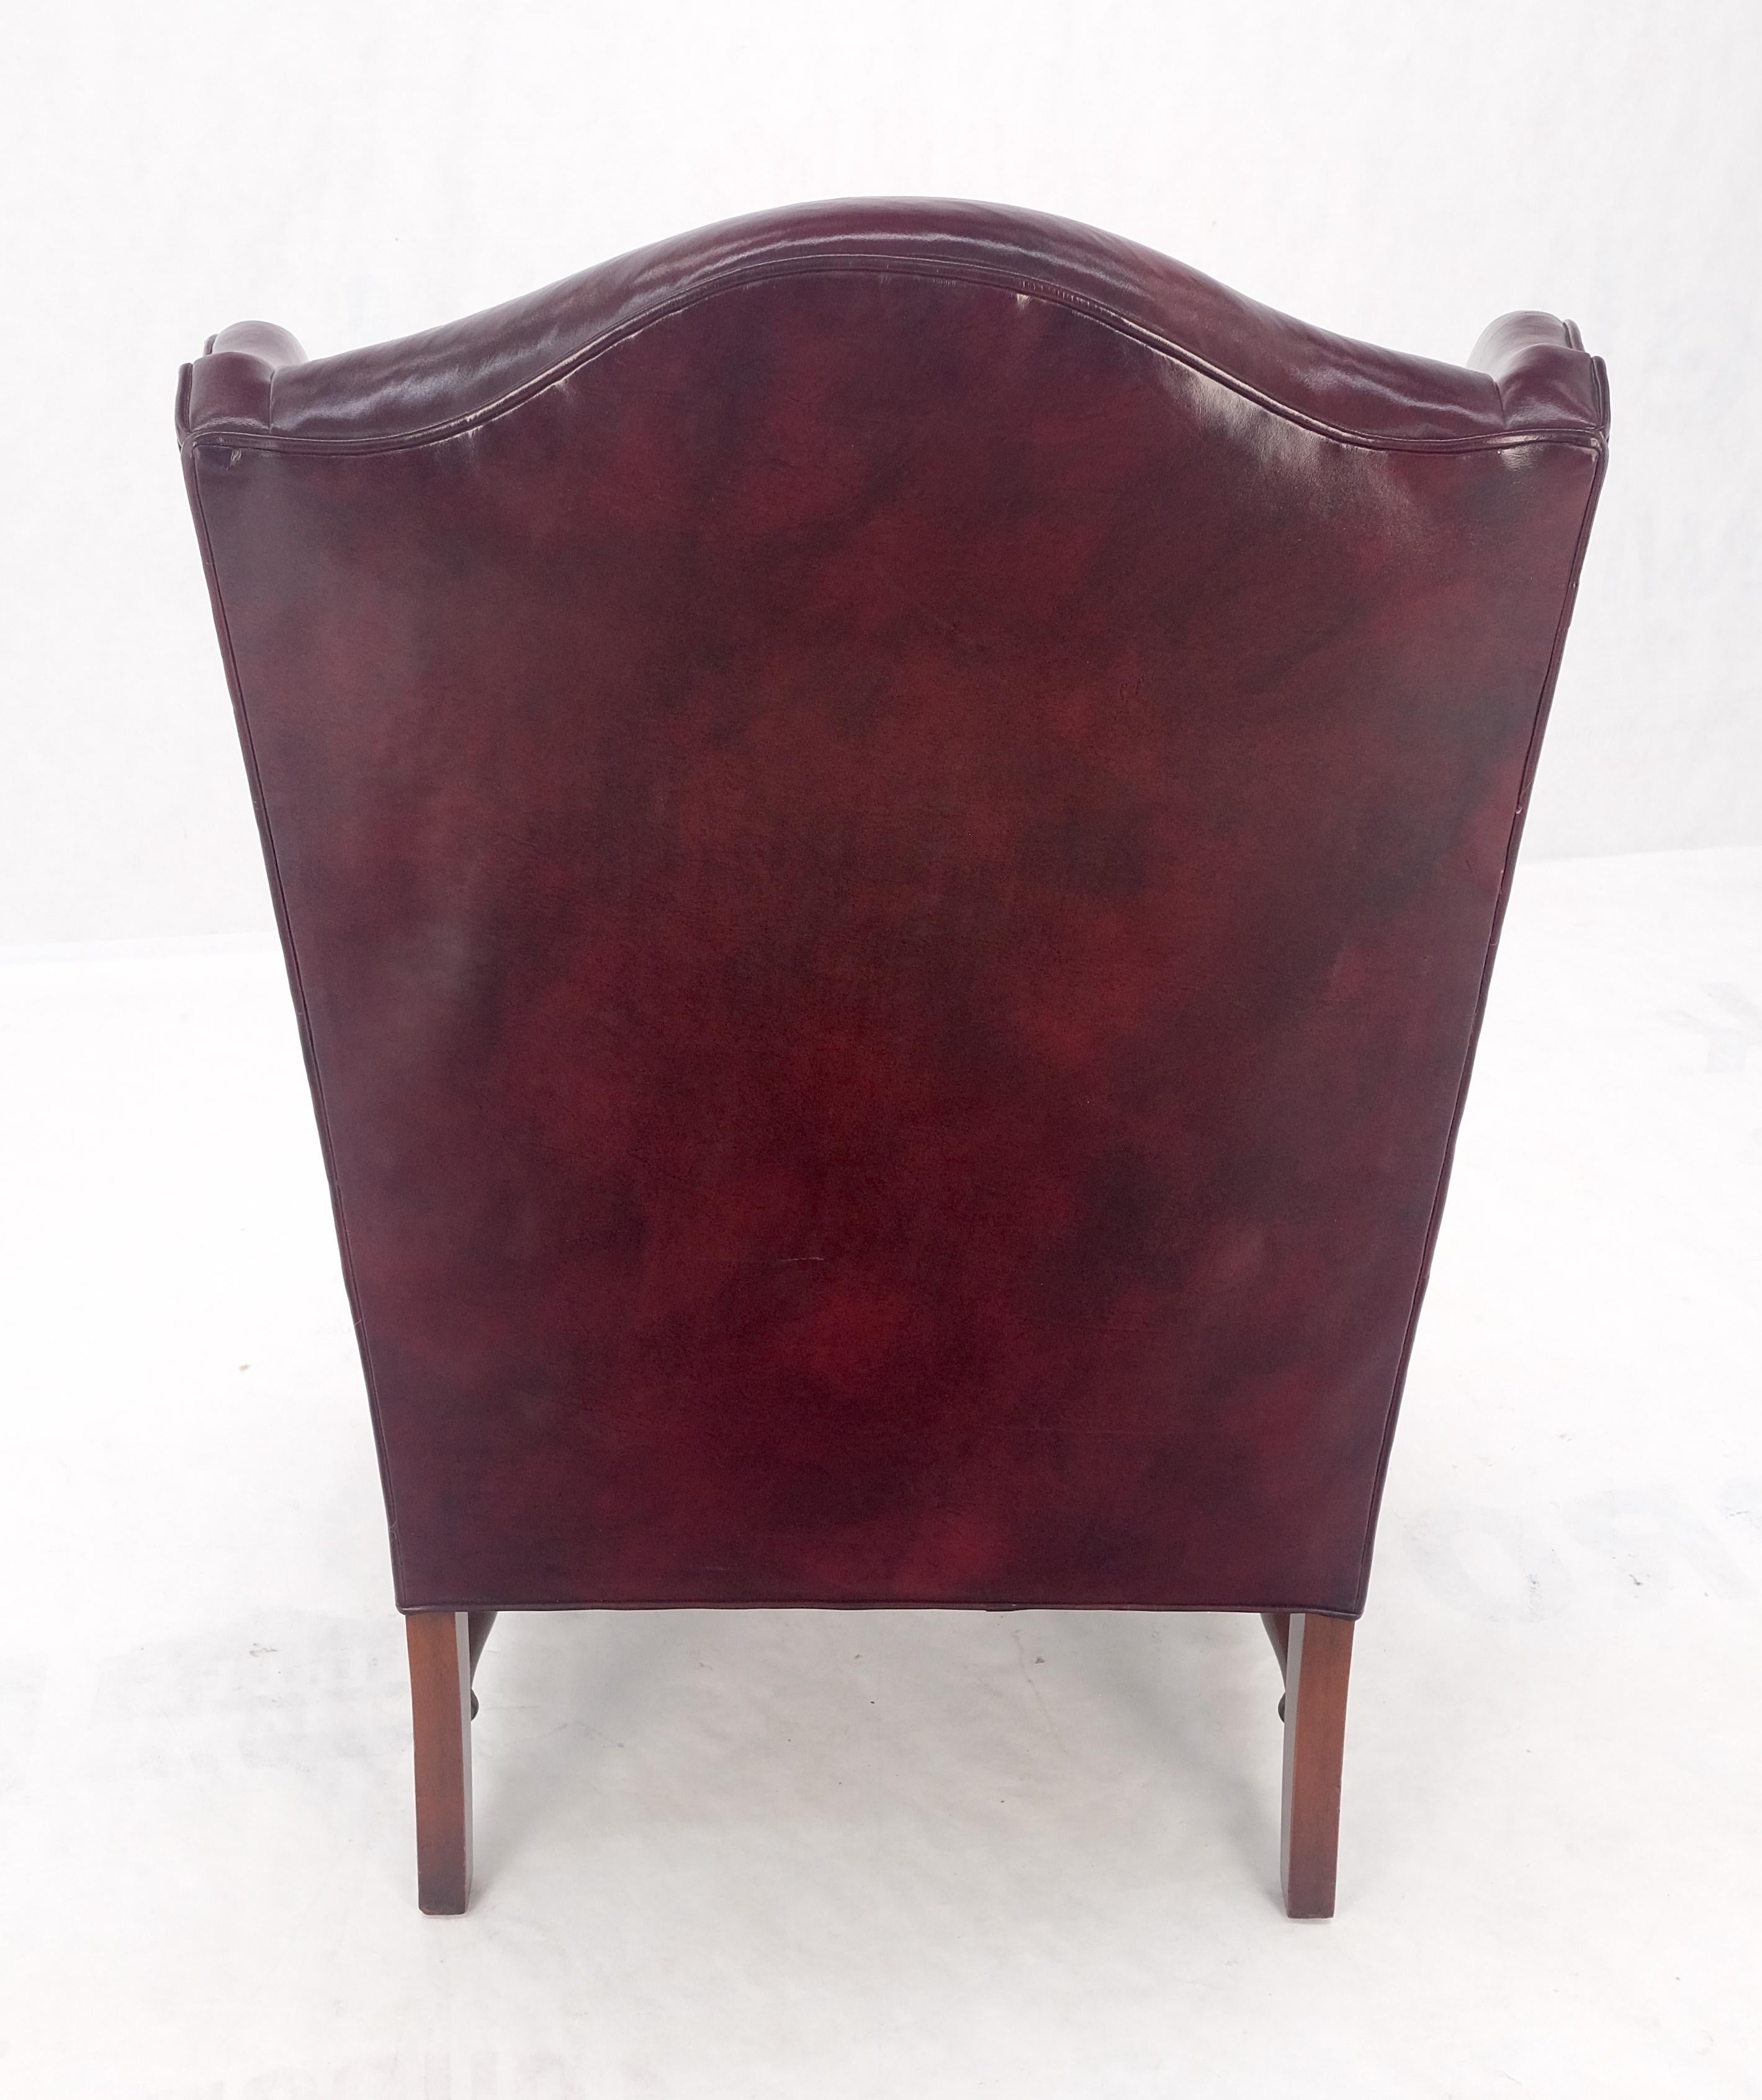 Kindel Burgundy Leather Upholstery Carved Mahogany Legs Wingback Chair & Ottoman en vente 1